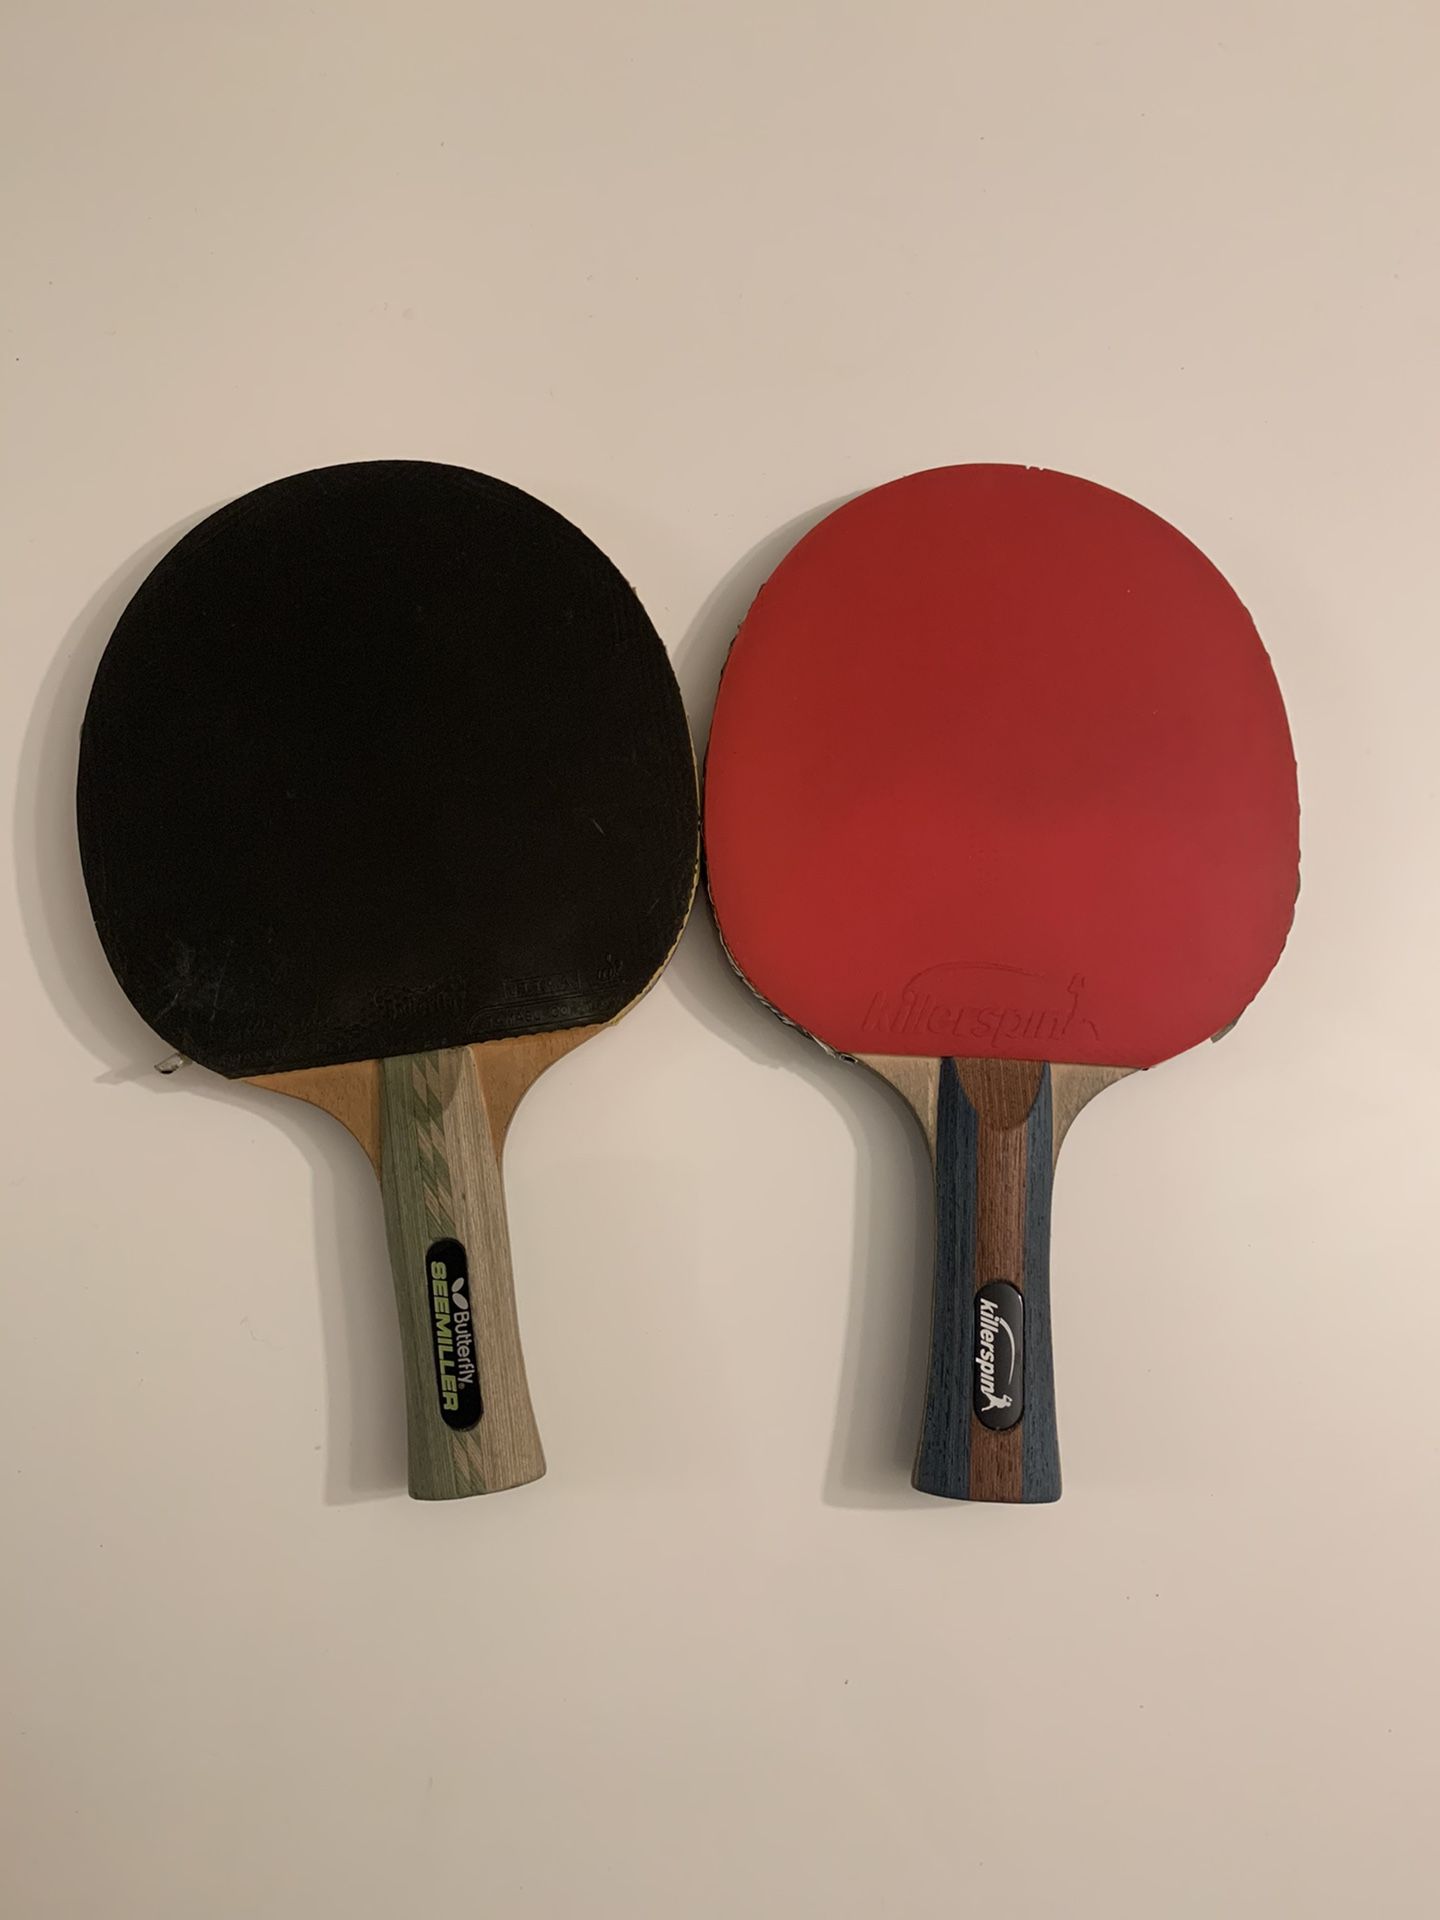 2 Table Tennis Paddles